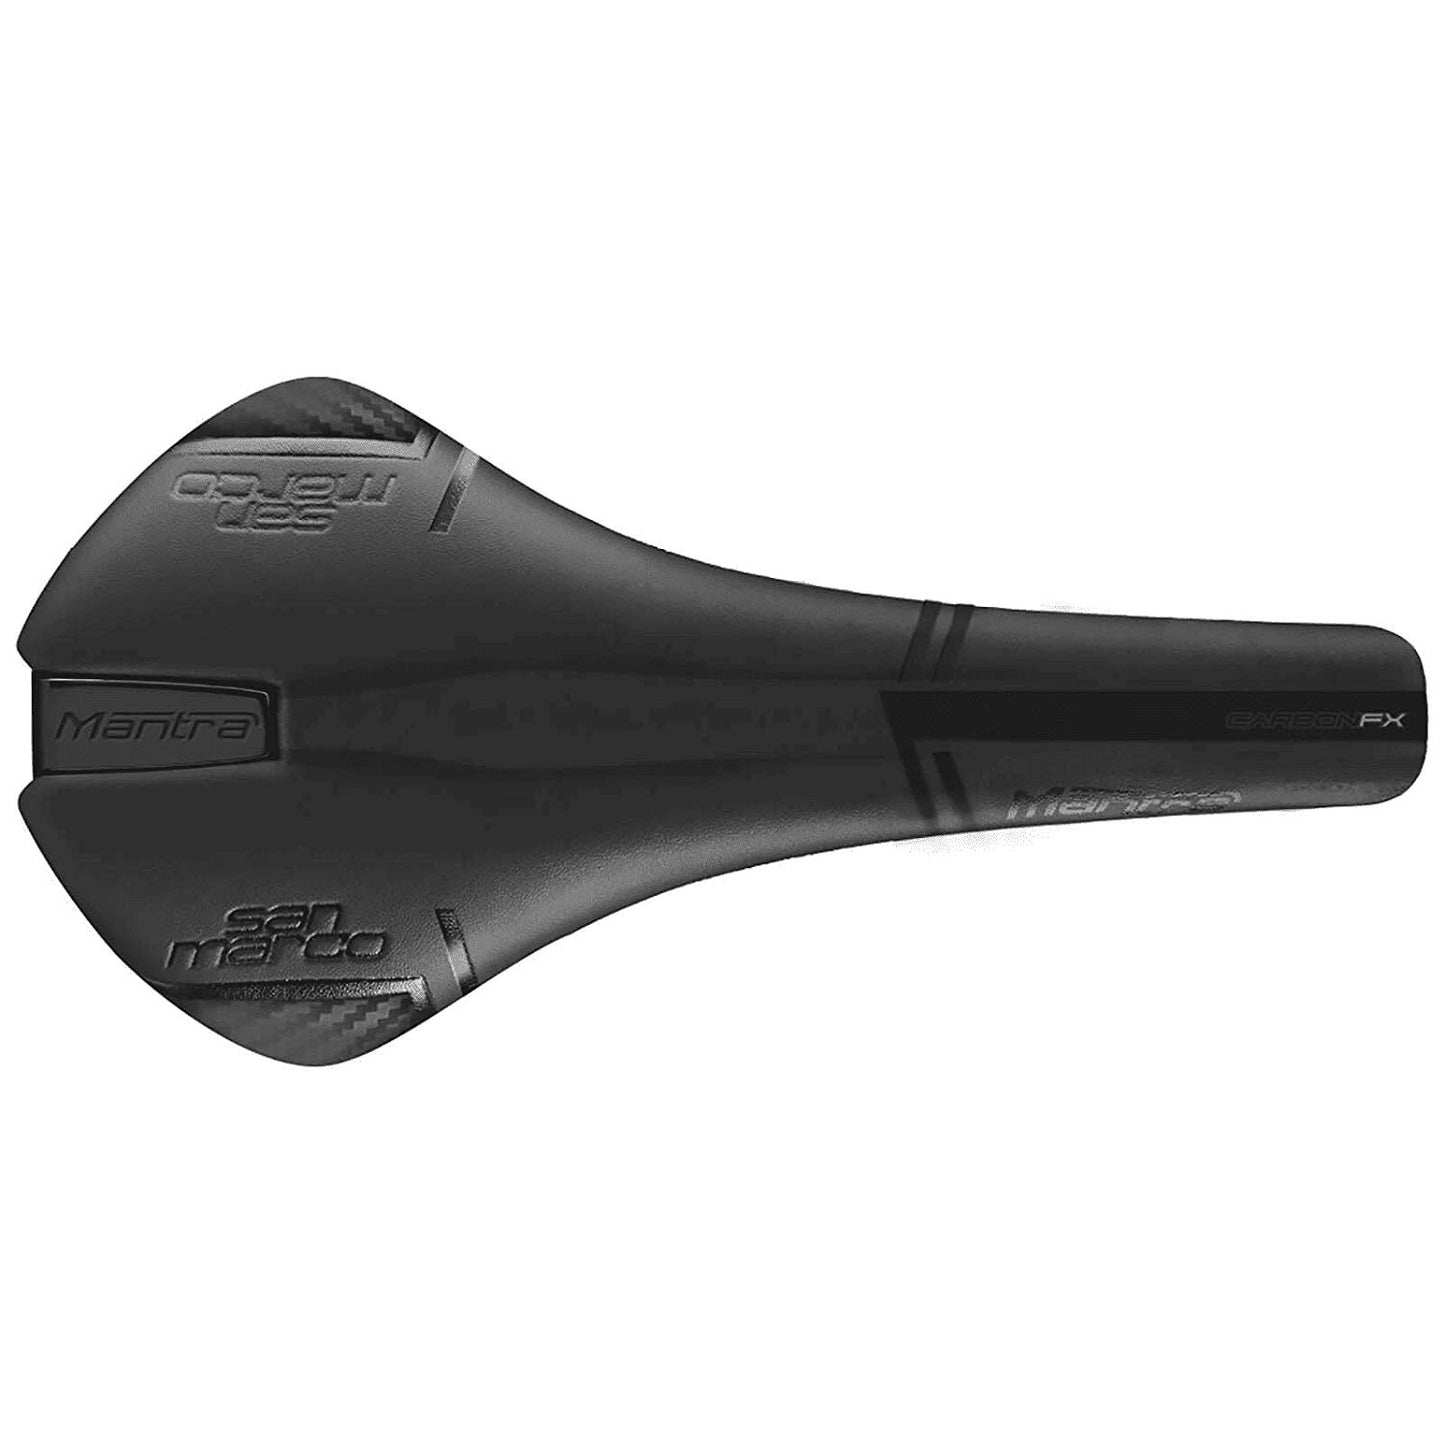 NEW Selle San Marco Mantra Racing Saddle Full Fit Wide Xsilite Black Road L1